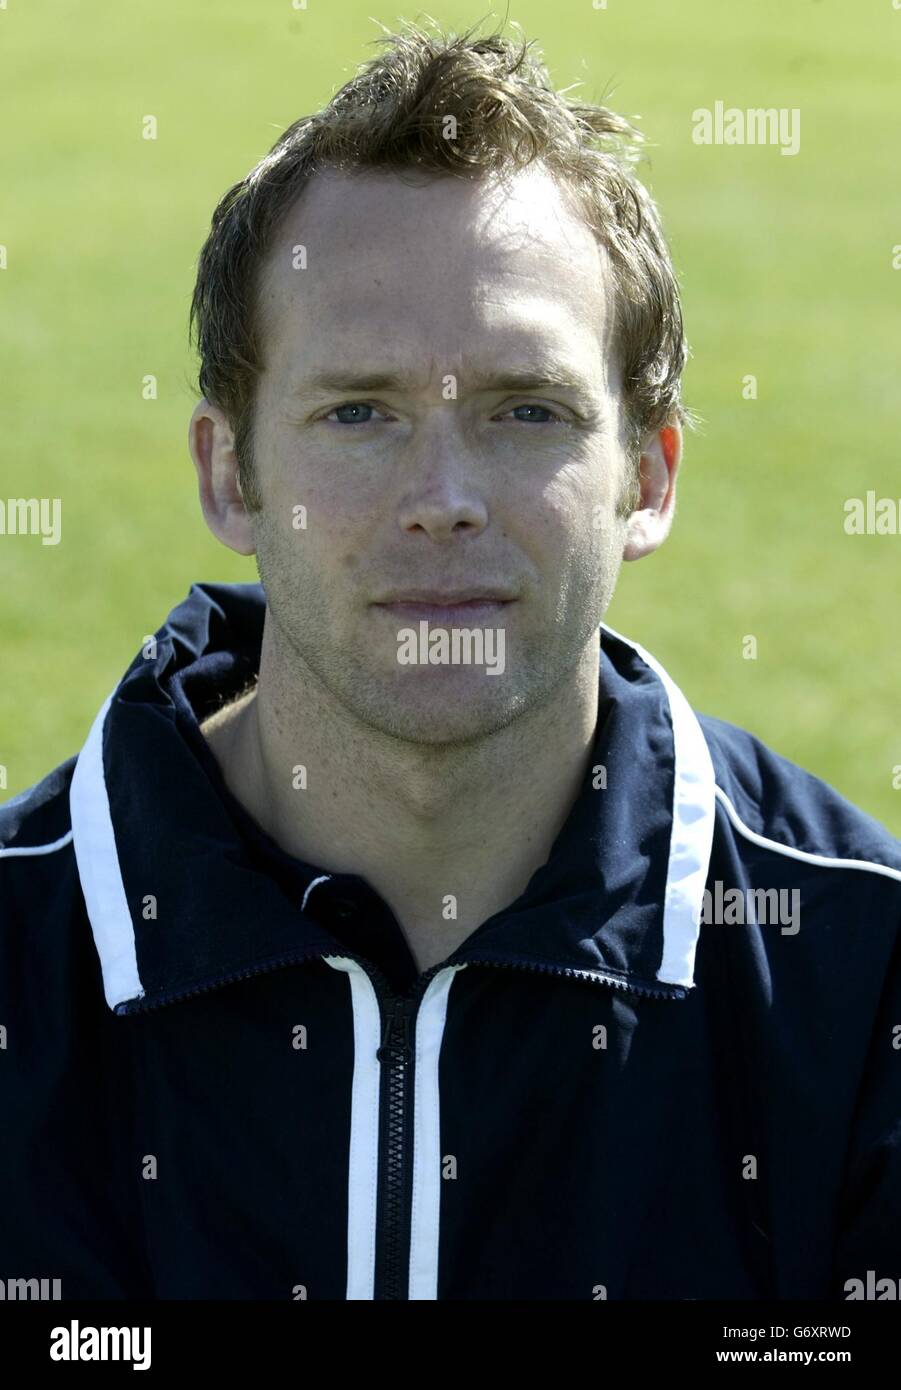 Stuart Barnes of Gloucestershire County Cricket Club during a photocall at Bristol, ahead of the new 2004 season. Stock Photo